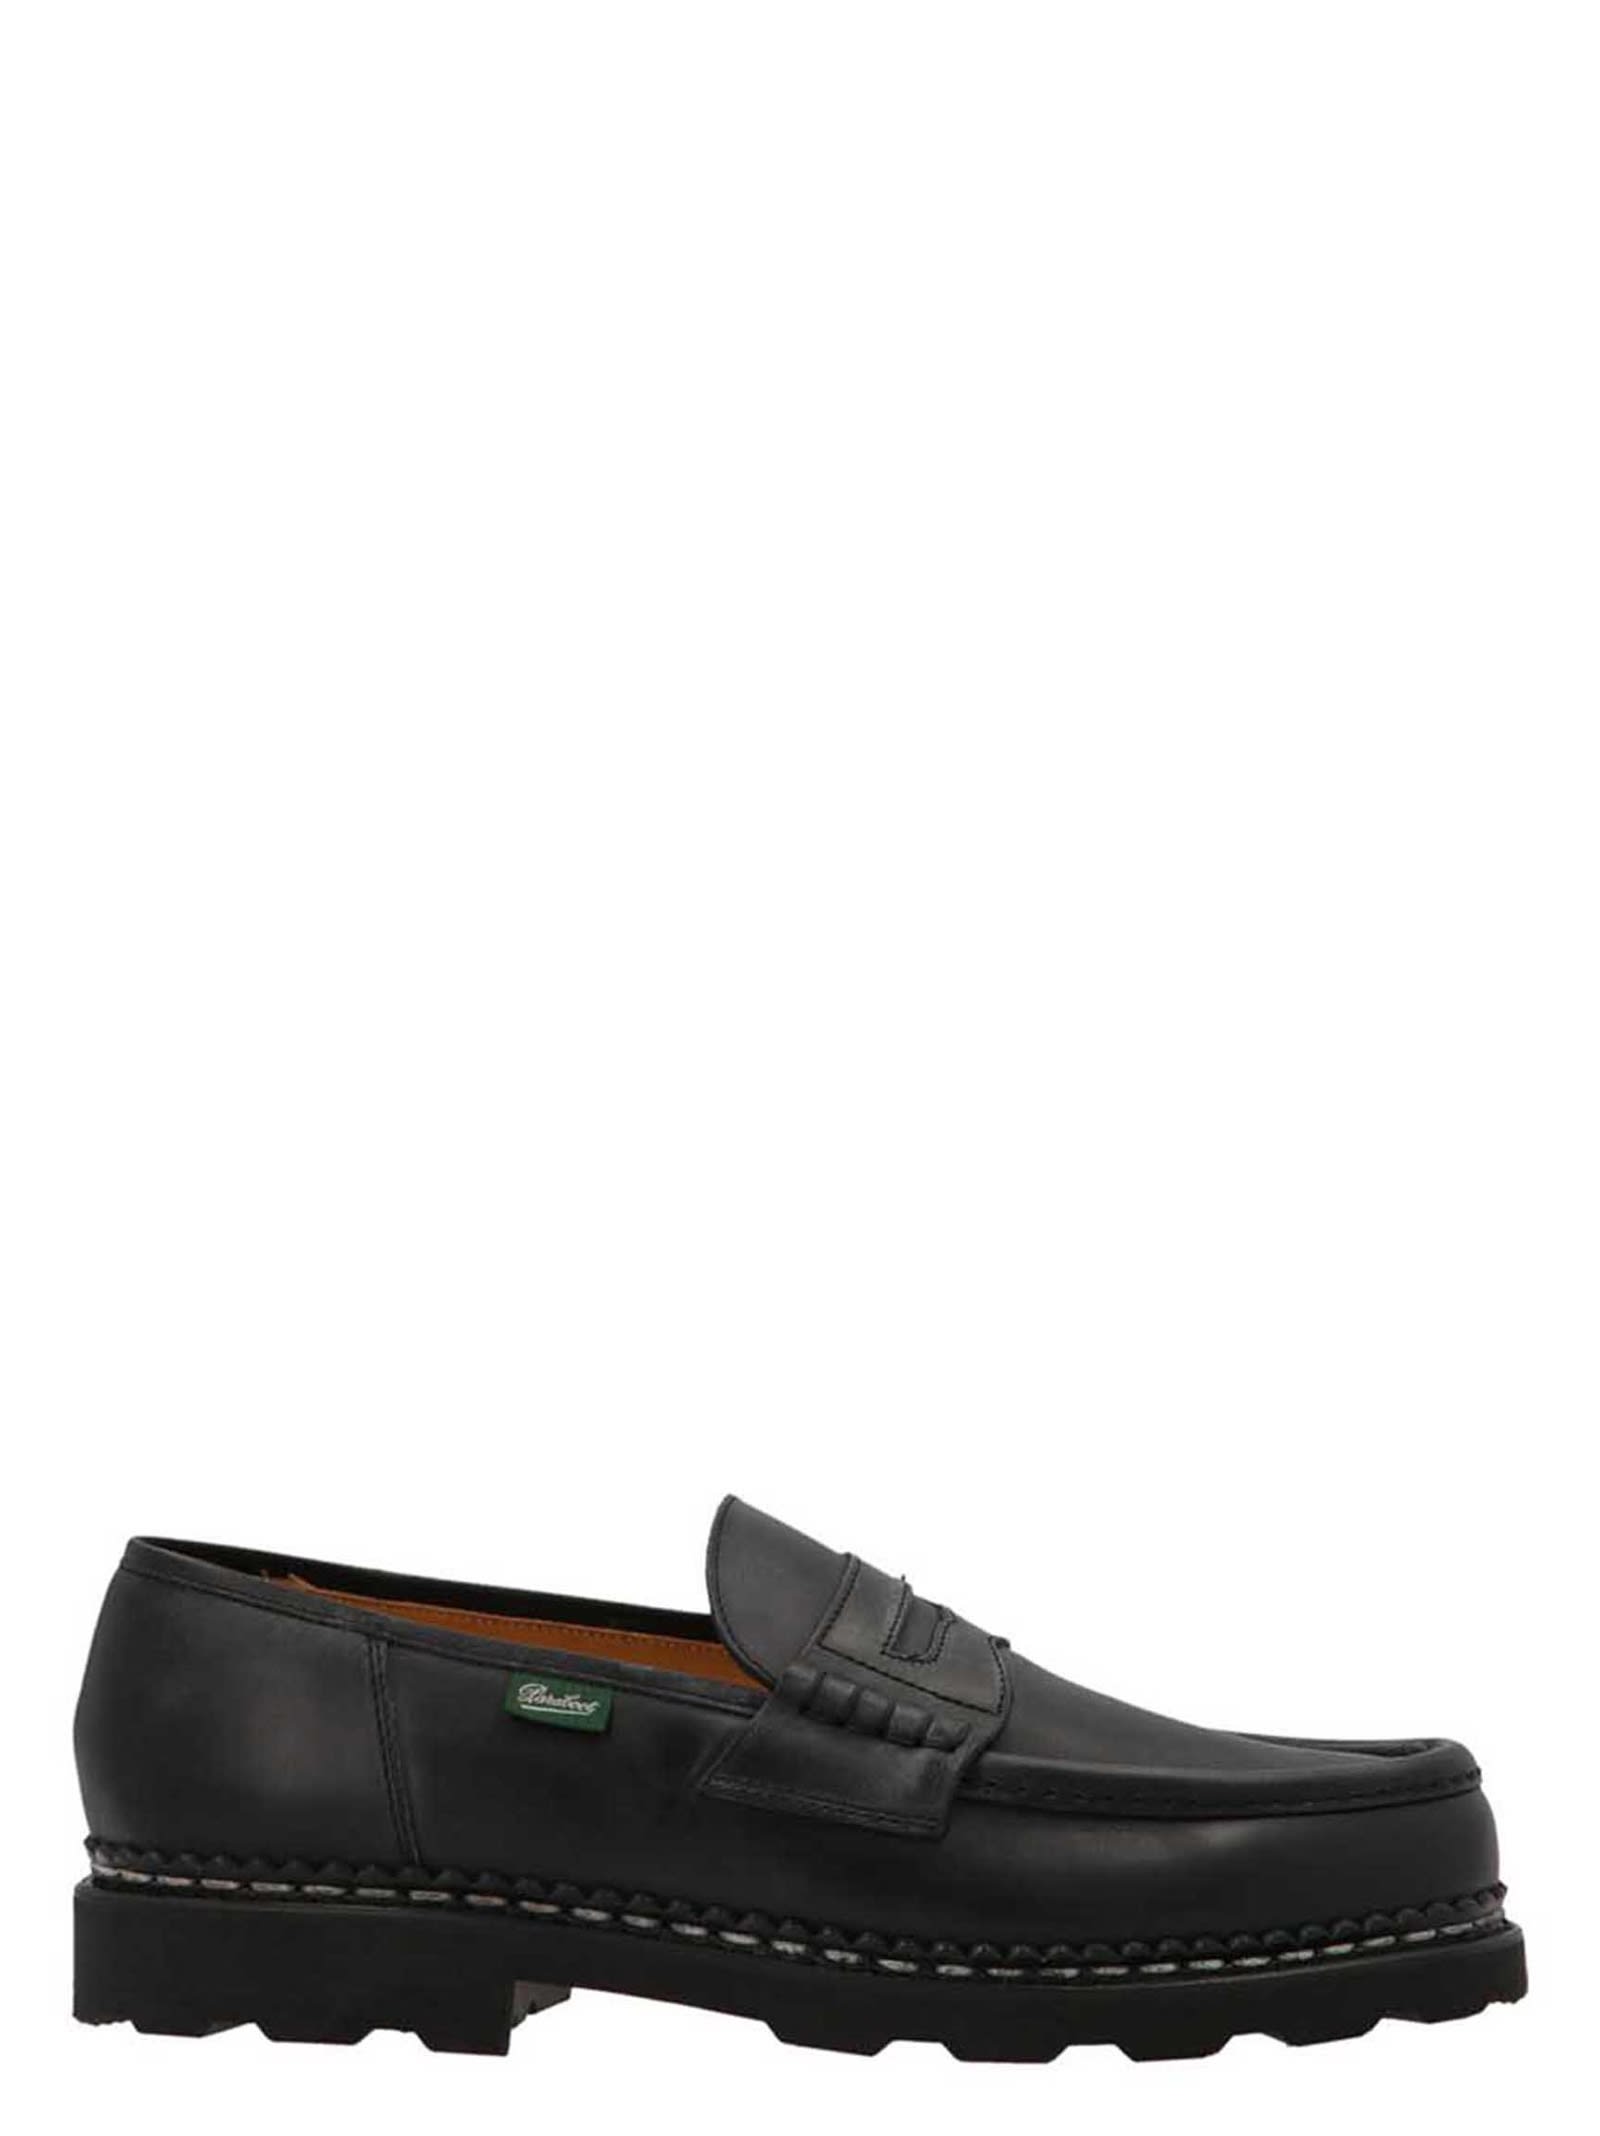 remis Loafers